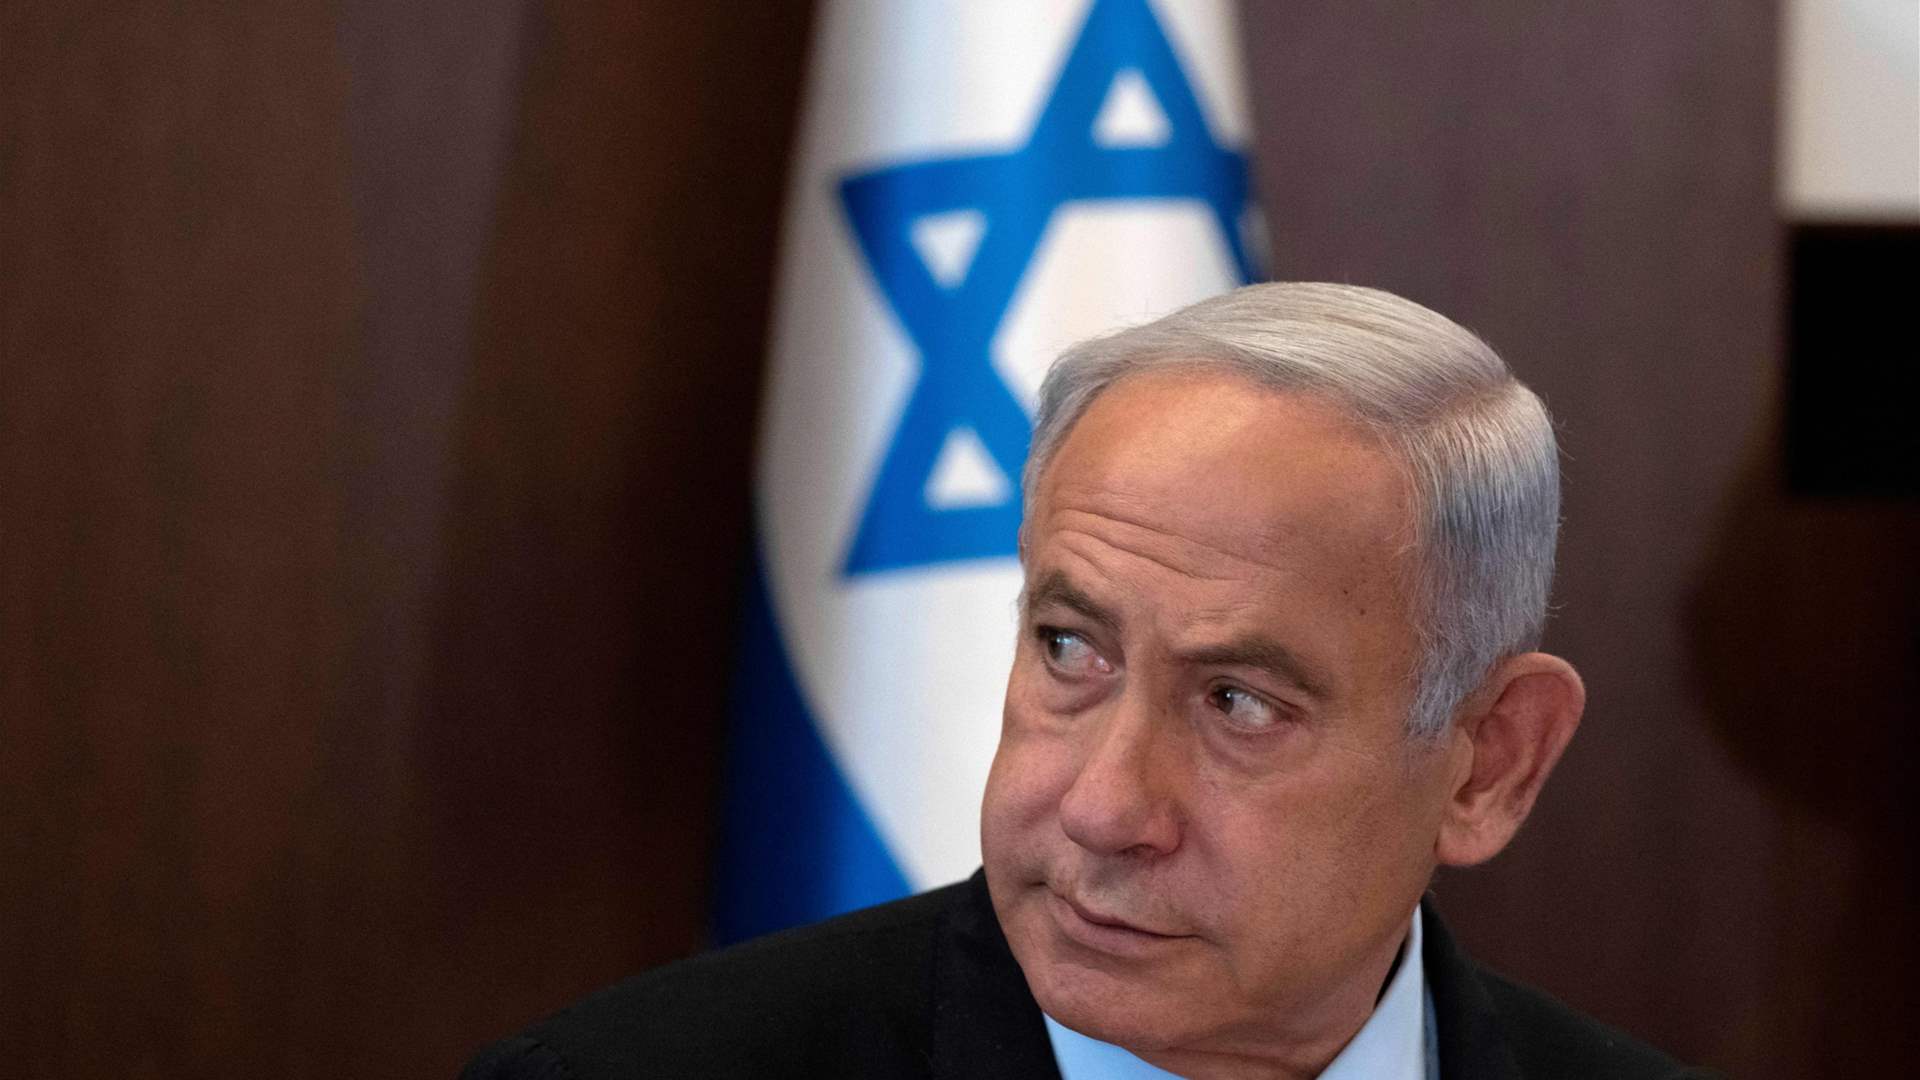 Netanyahu addresses&#39; tragic day&#39; in war, vows to continue fight for &#39;absolute victory&#39;